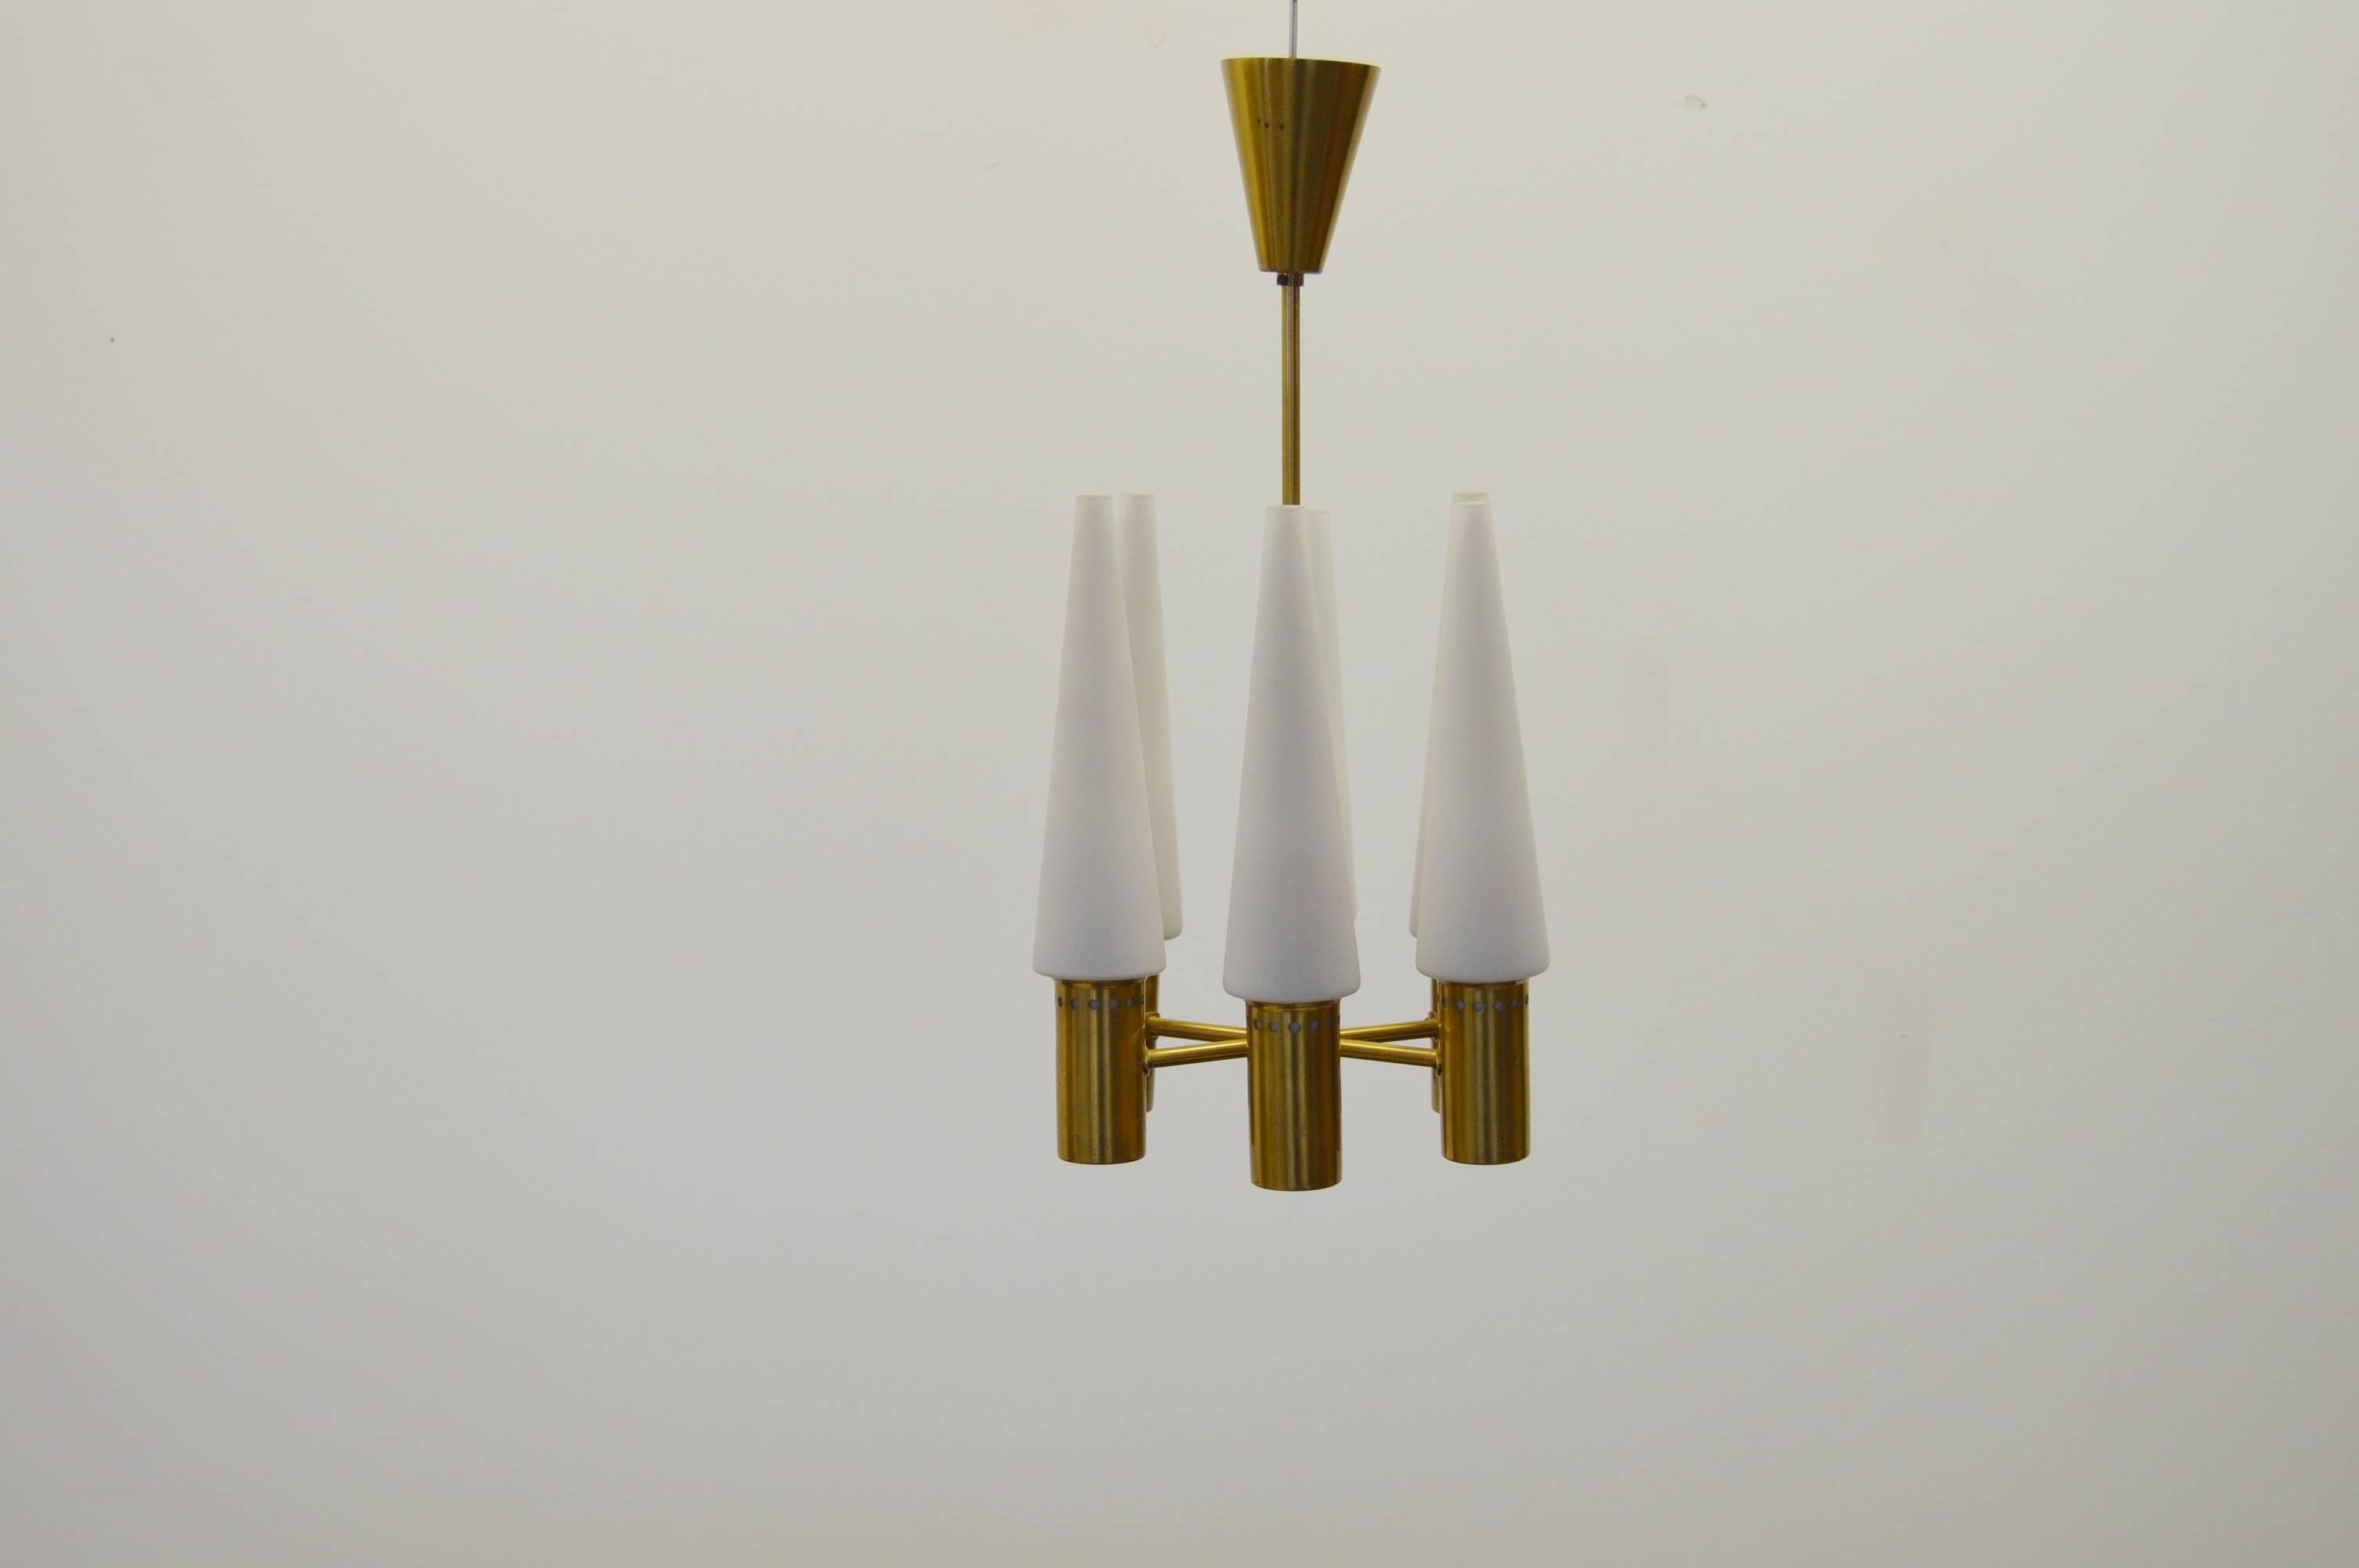 Chandelier with six-light points. Designed by Hans-Agne Jakobsson for his own company Hans-Agne Jakobsson AB in Markaryd Sweden.
Brass and opaline glass.
 